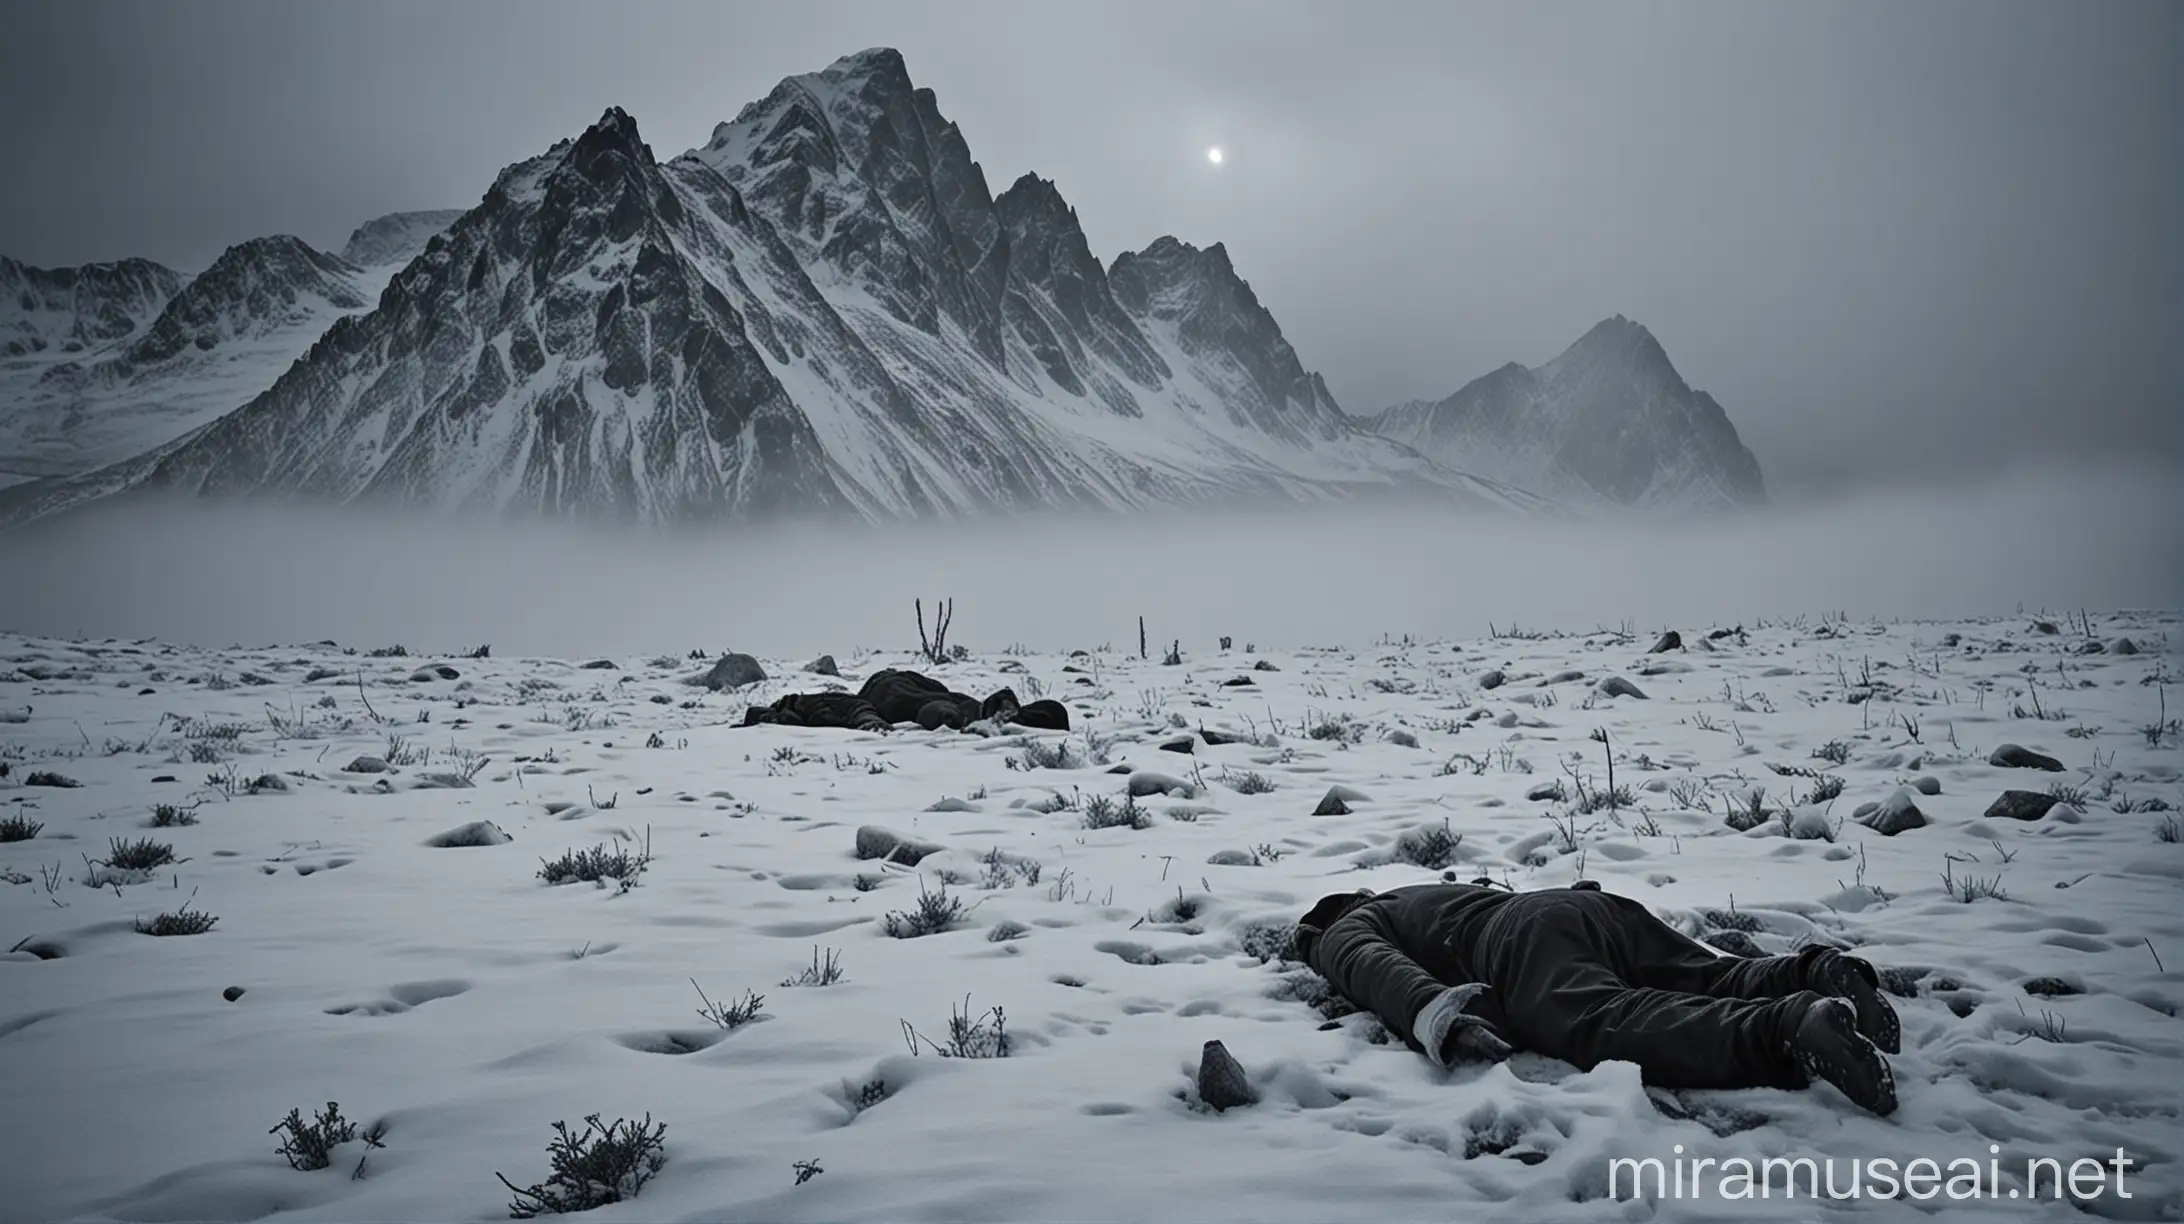 "A chilling thumbnail for 'The Dyatlov Pass Incident: A Chilling Unexplained Mystery' featuring a hauntingly dark and snowy mountain landscape, with a faint trace of a tent in the distance, surrounded by eerie mist and an unsettling atmosphere. In the foreground, a faint outline of a hiker's corpse, frozen in a twisted pose, with eyes glowing with an otherworldly light, as if frozen in a scream of terror."